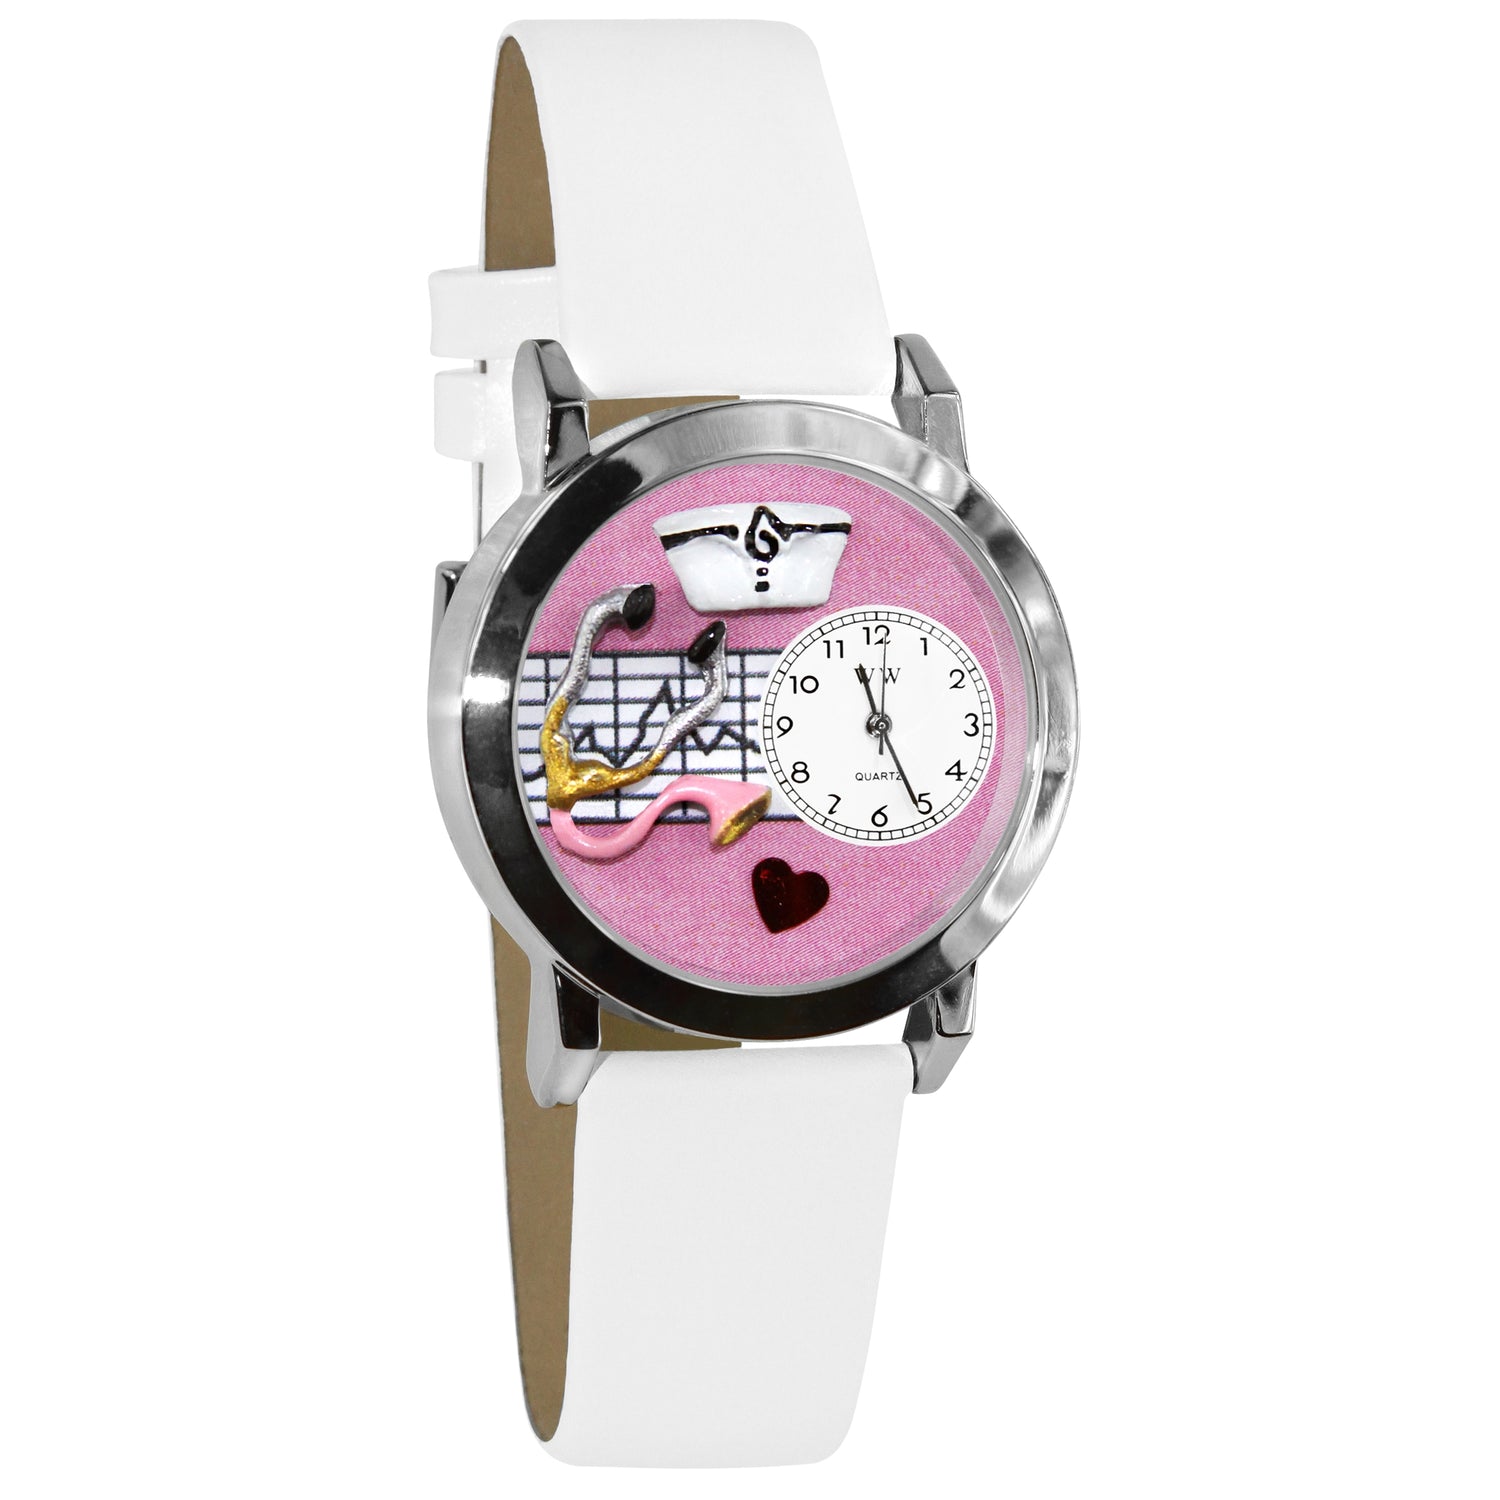 Whimsical Gifts | Nurse Pink 3D Watch Small Style | Handmade in USA | Professions Themed | Nurse | Novelty Unique Fun Miniatures Gift | Silver Finish White Leather Watch Band